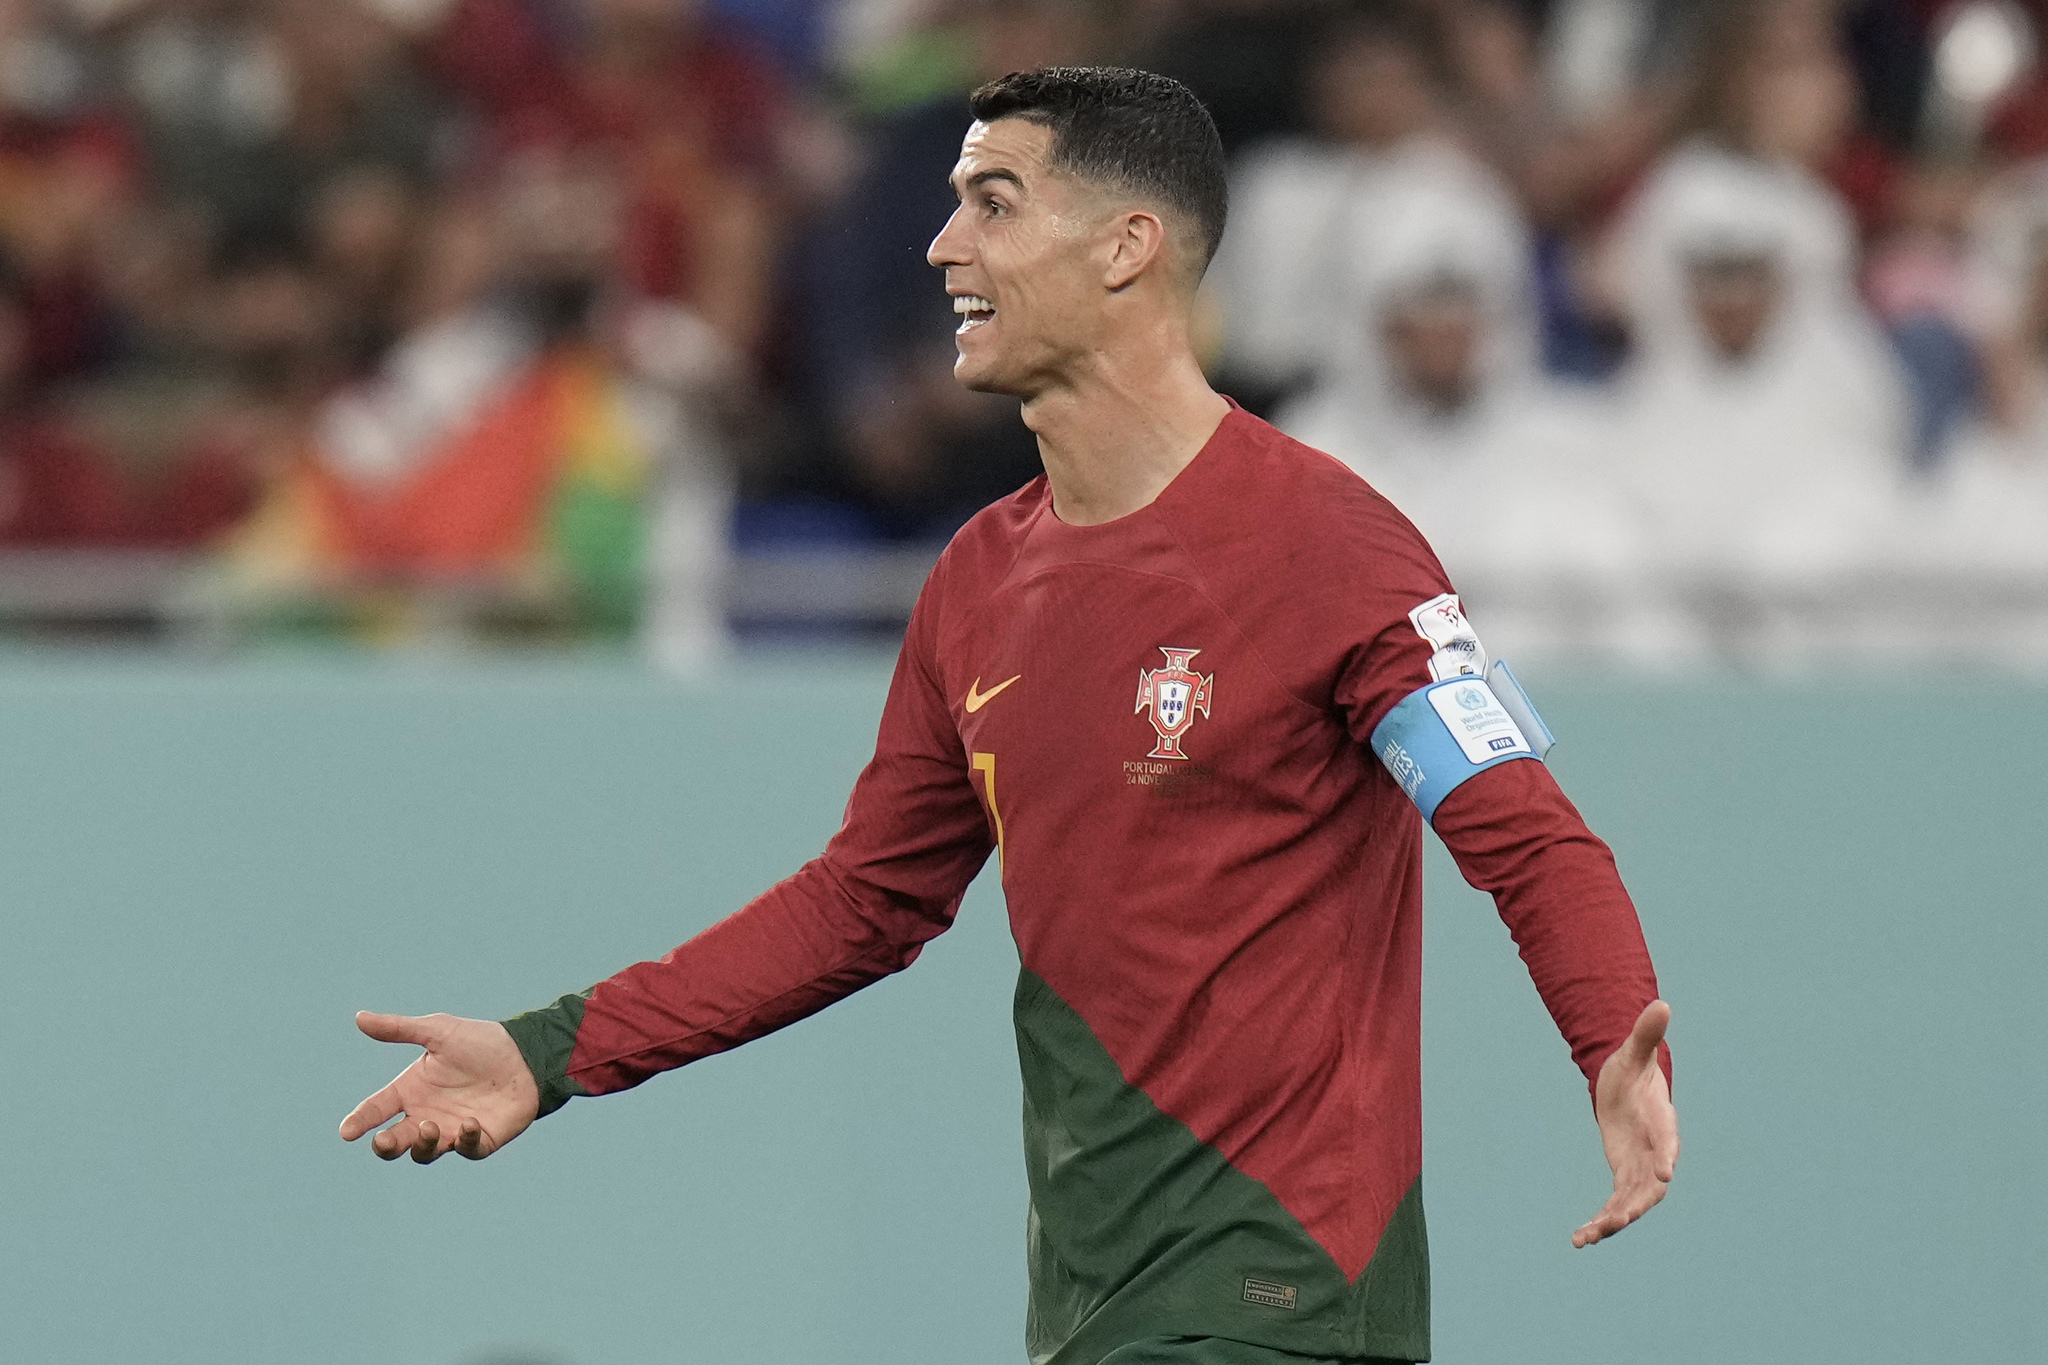 Portugal's  lt;HIT gt;Cristiano lt;/HIT gt; Ronaldo gestures during the World Cup group H soccer match between Portugal and Ghana, at the Stadium 974 in Doha, Qatar, Thursday, Nov. 24, 2022. (AP Photo/Hassan Ammar)